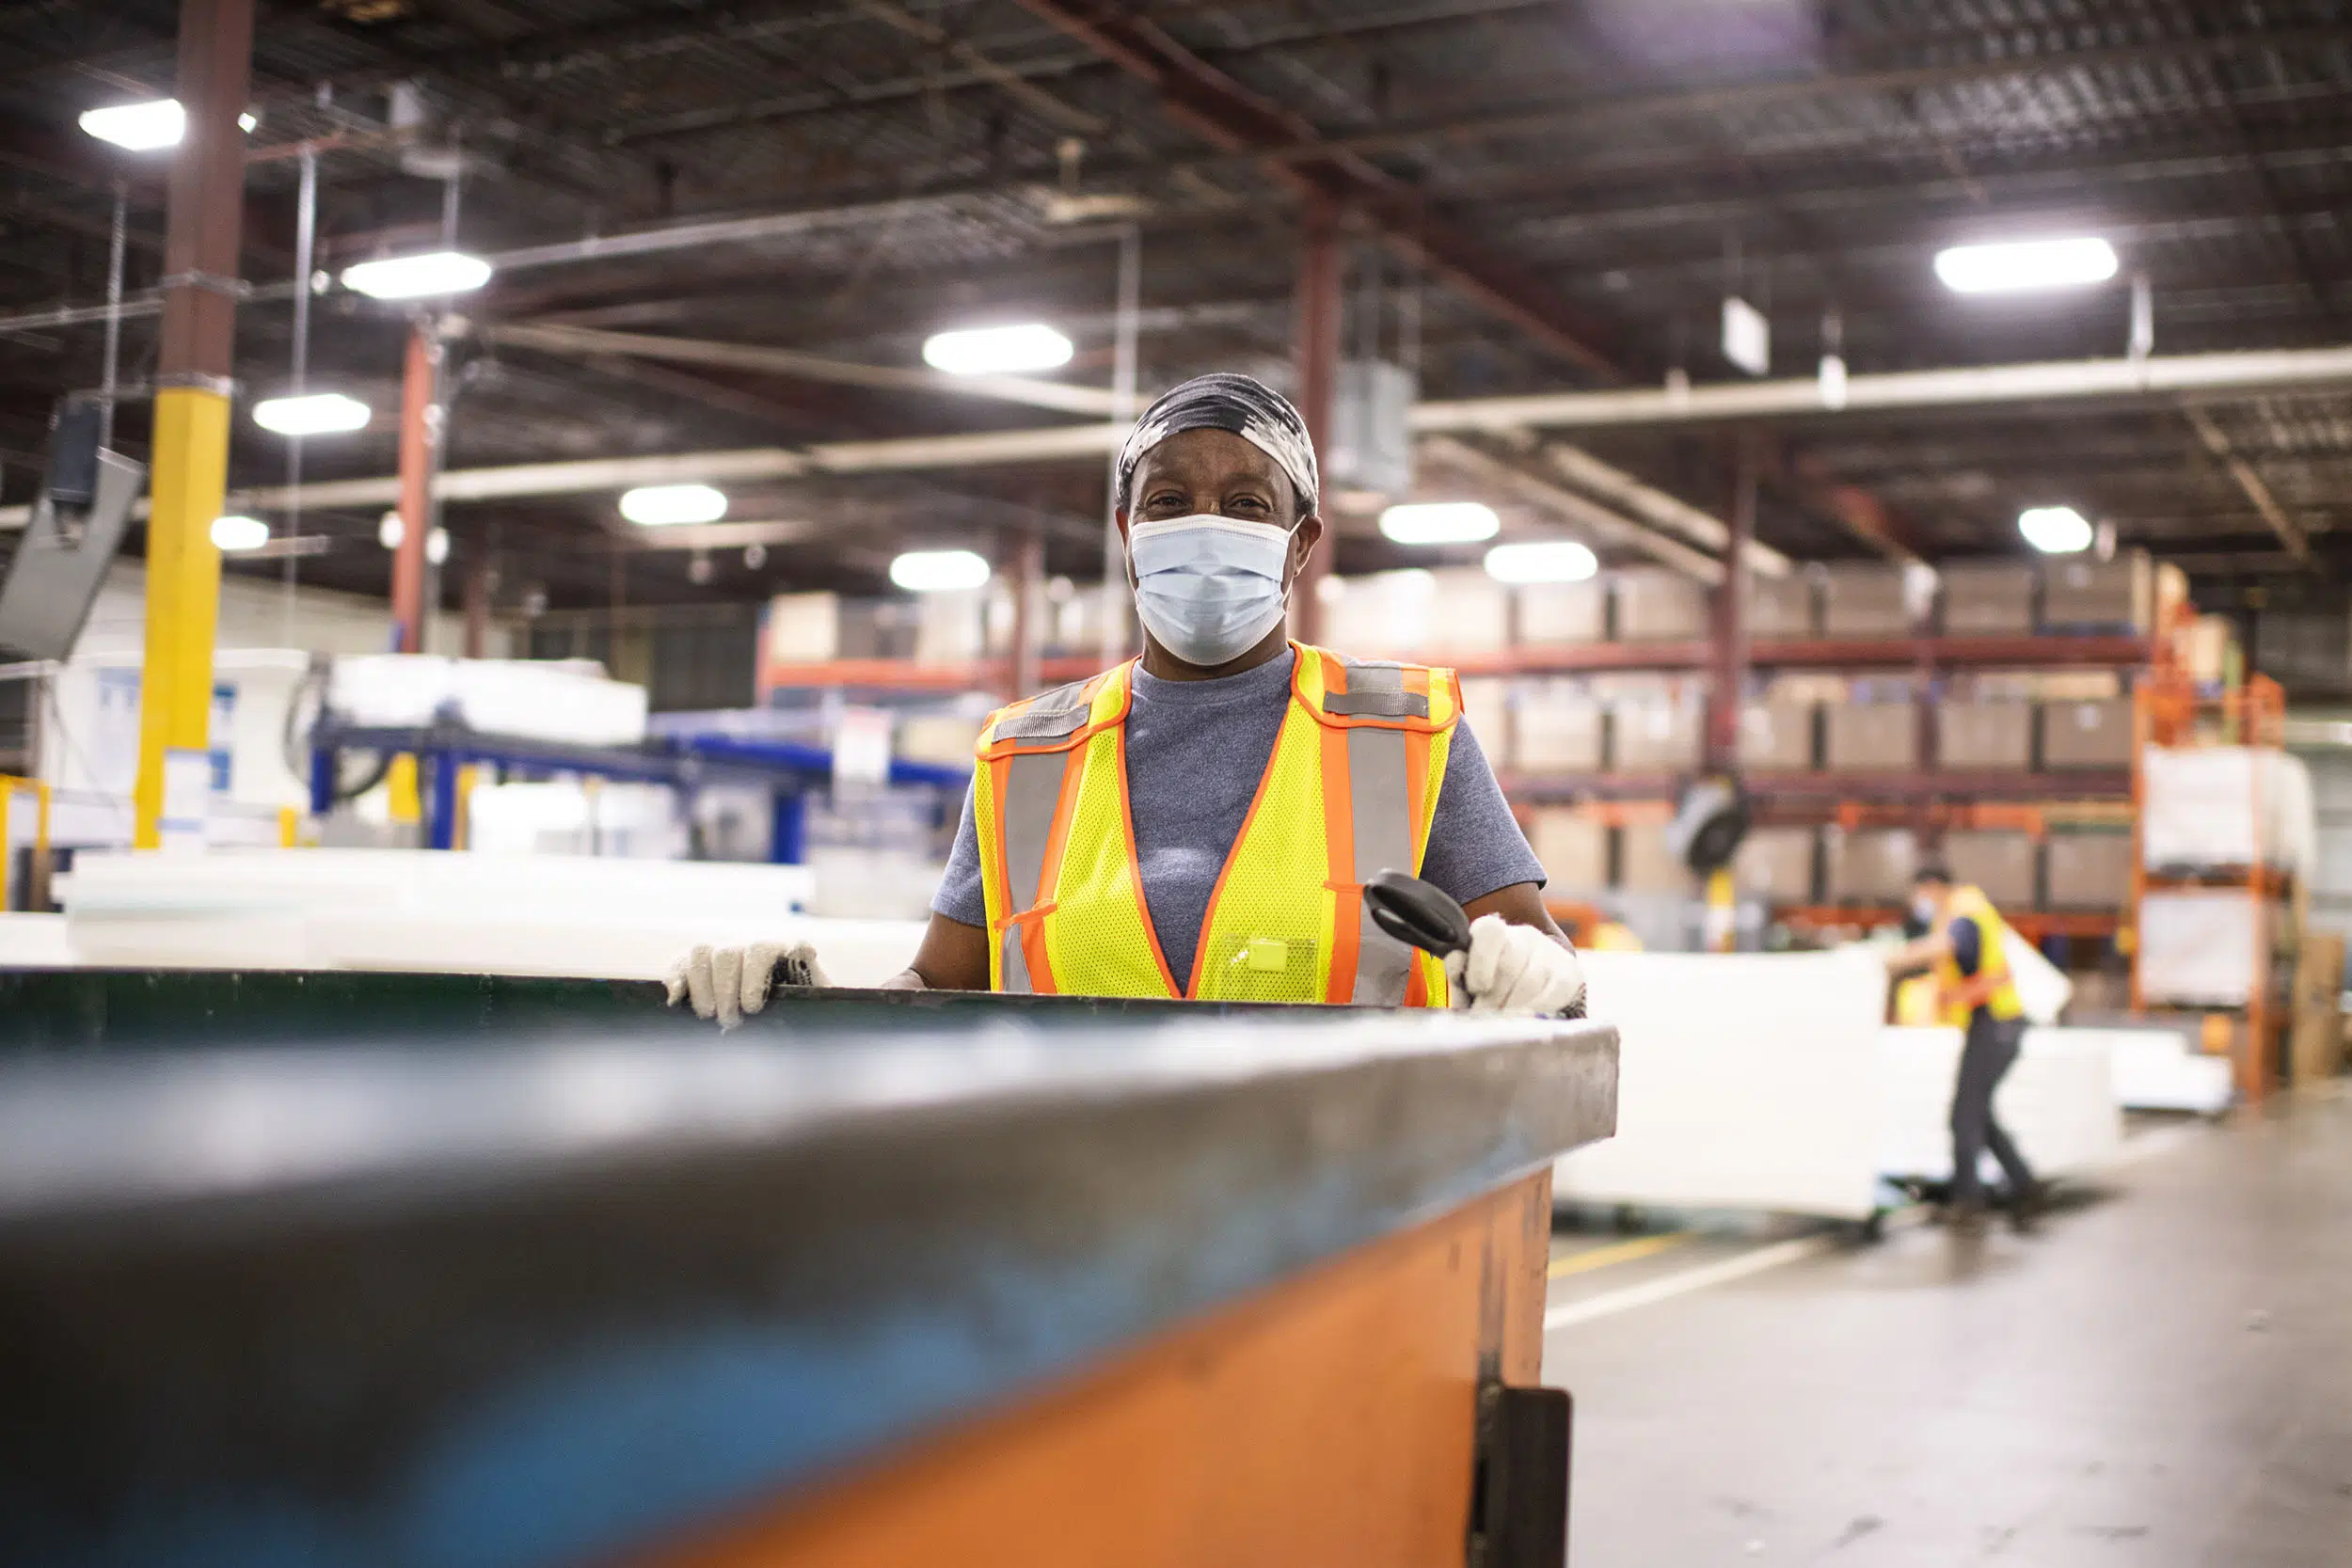 A worker moves a large cart across the factory floor, moving materials where they need to go.